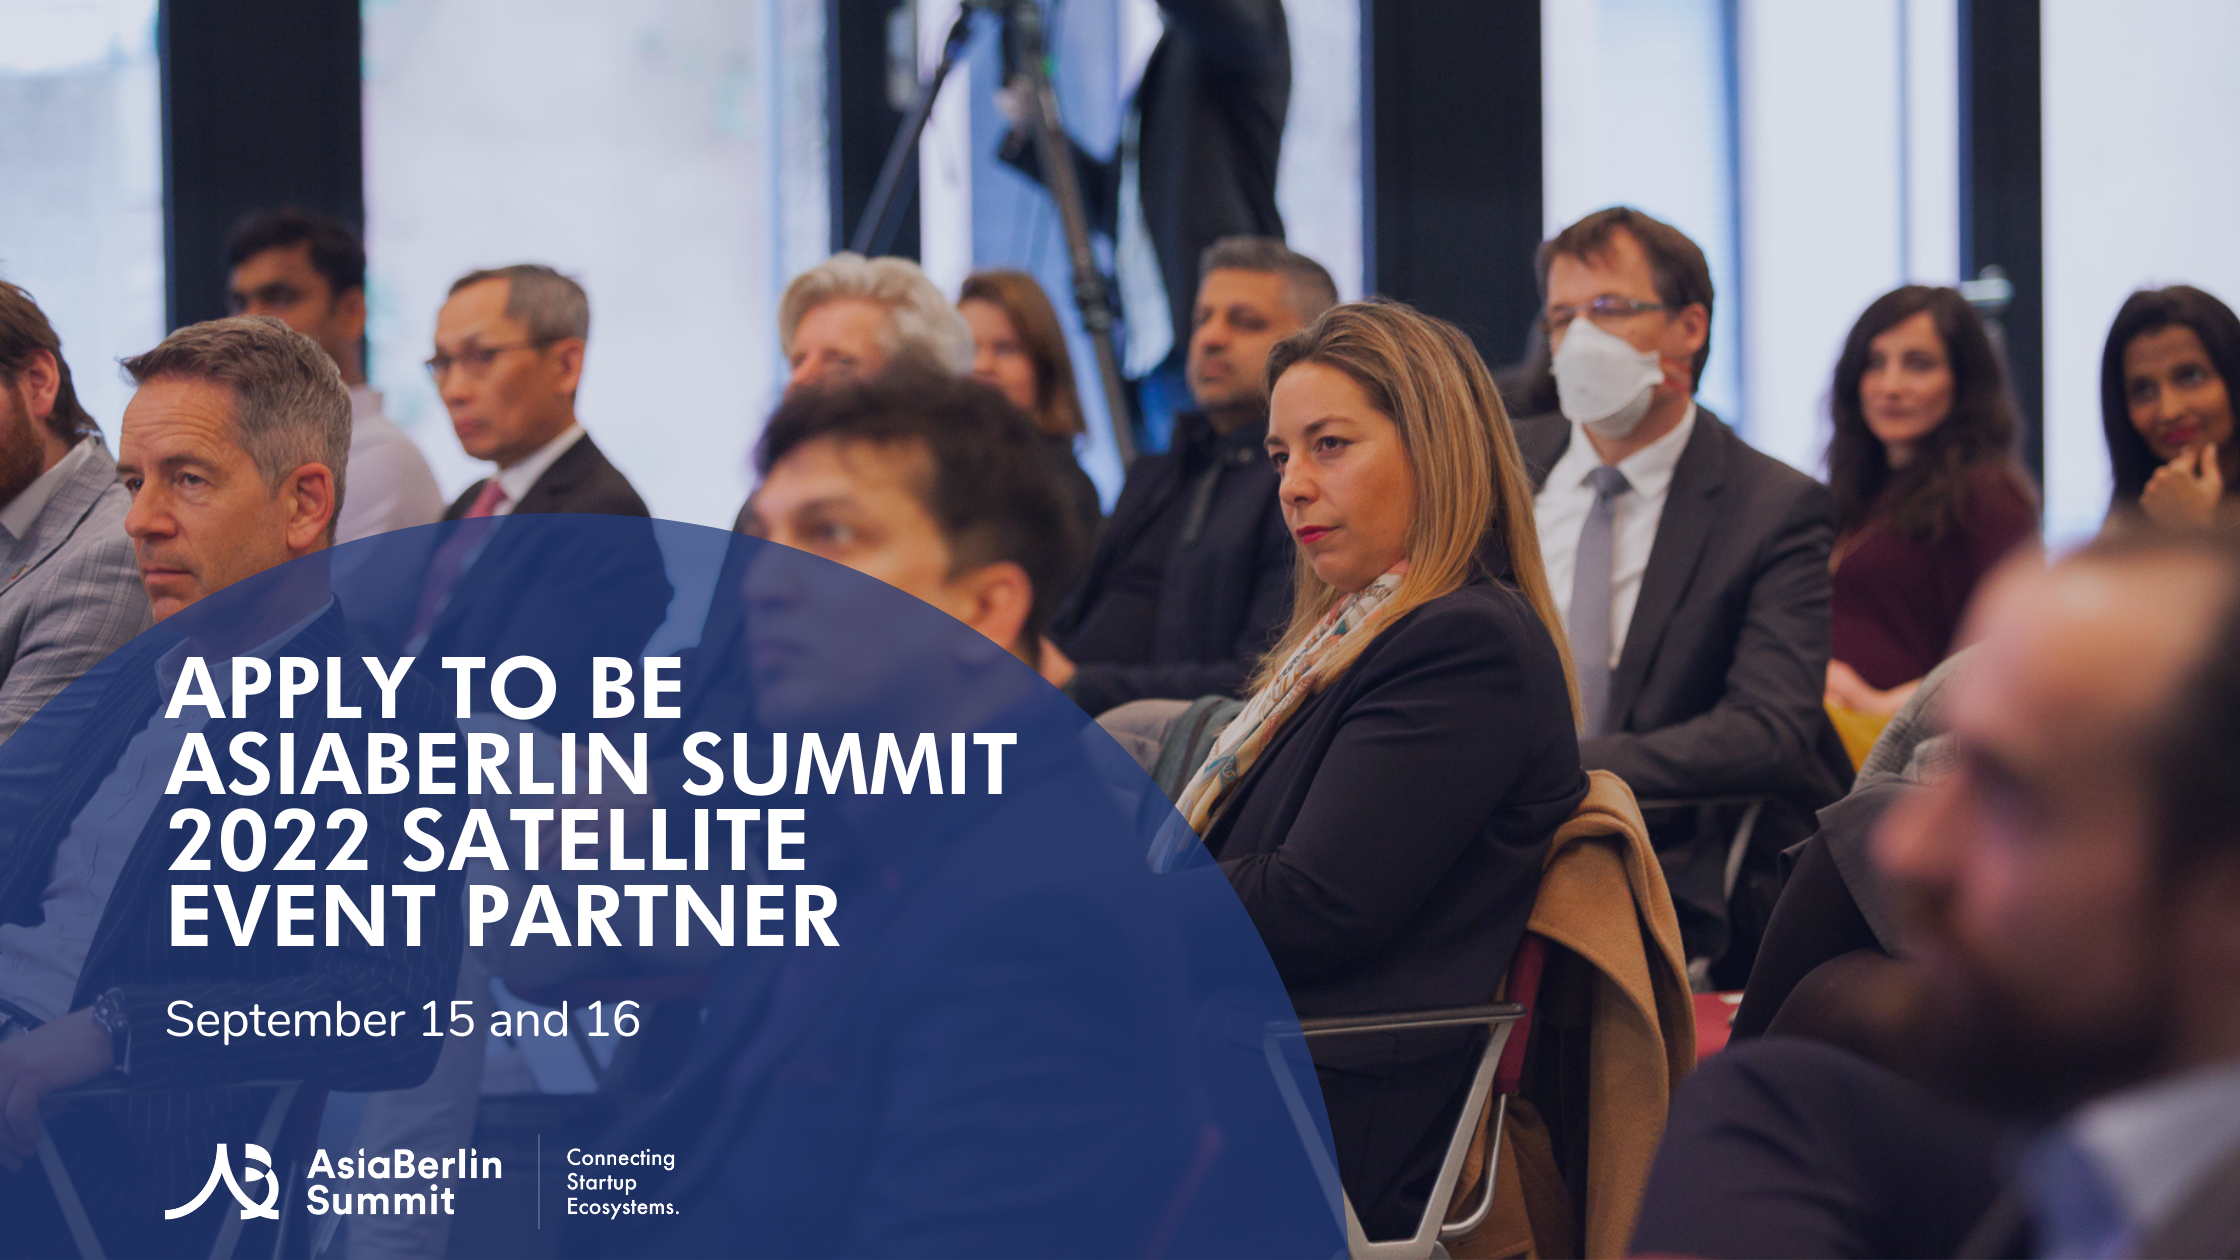 Join us as a Satellite Event Partner at AsiaBerlin Summit 2022